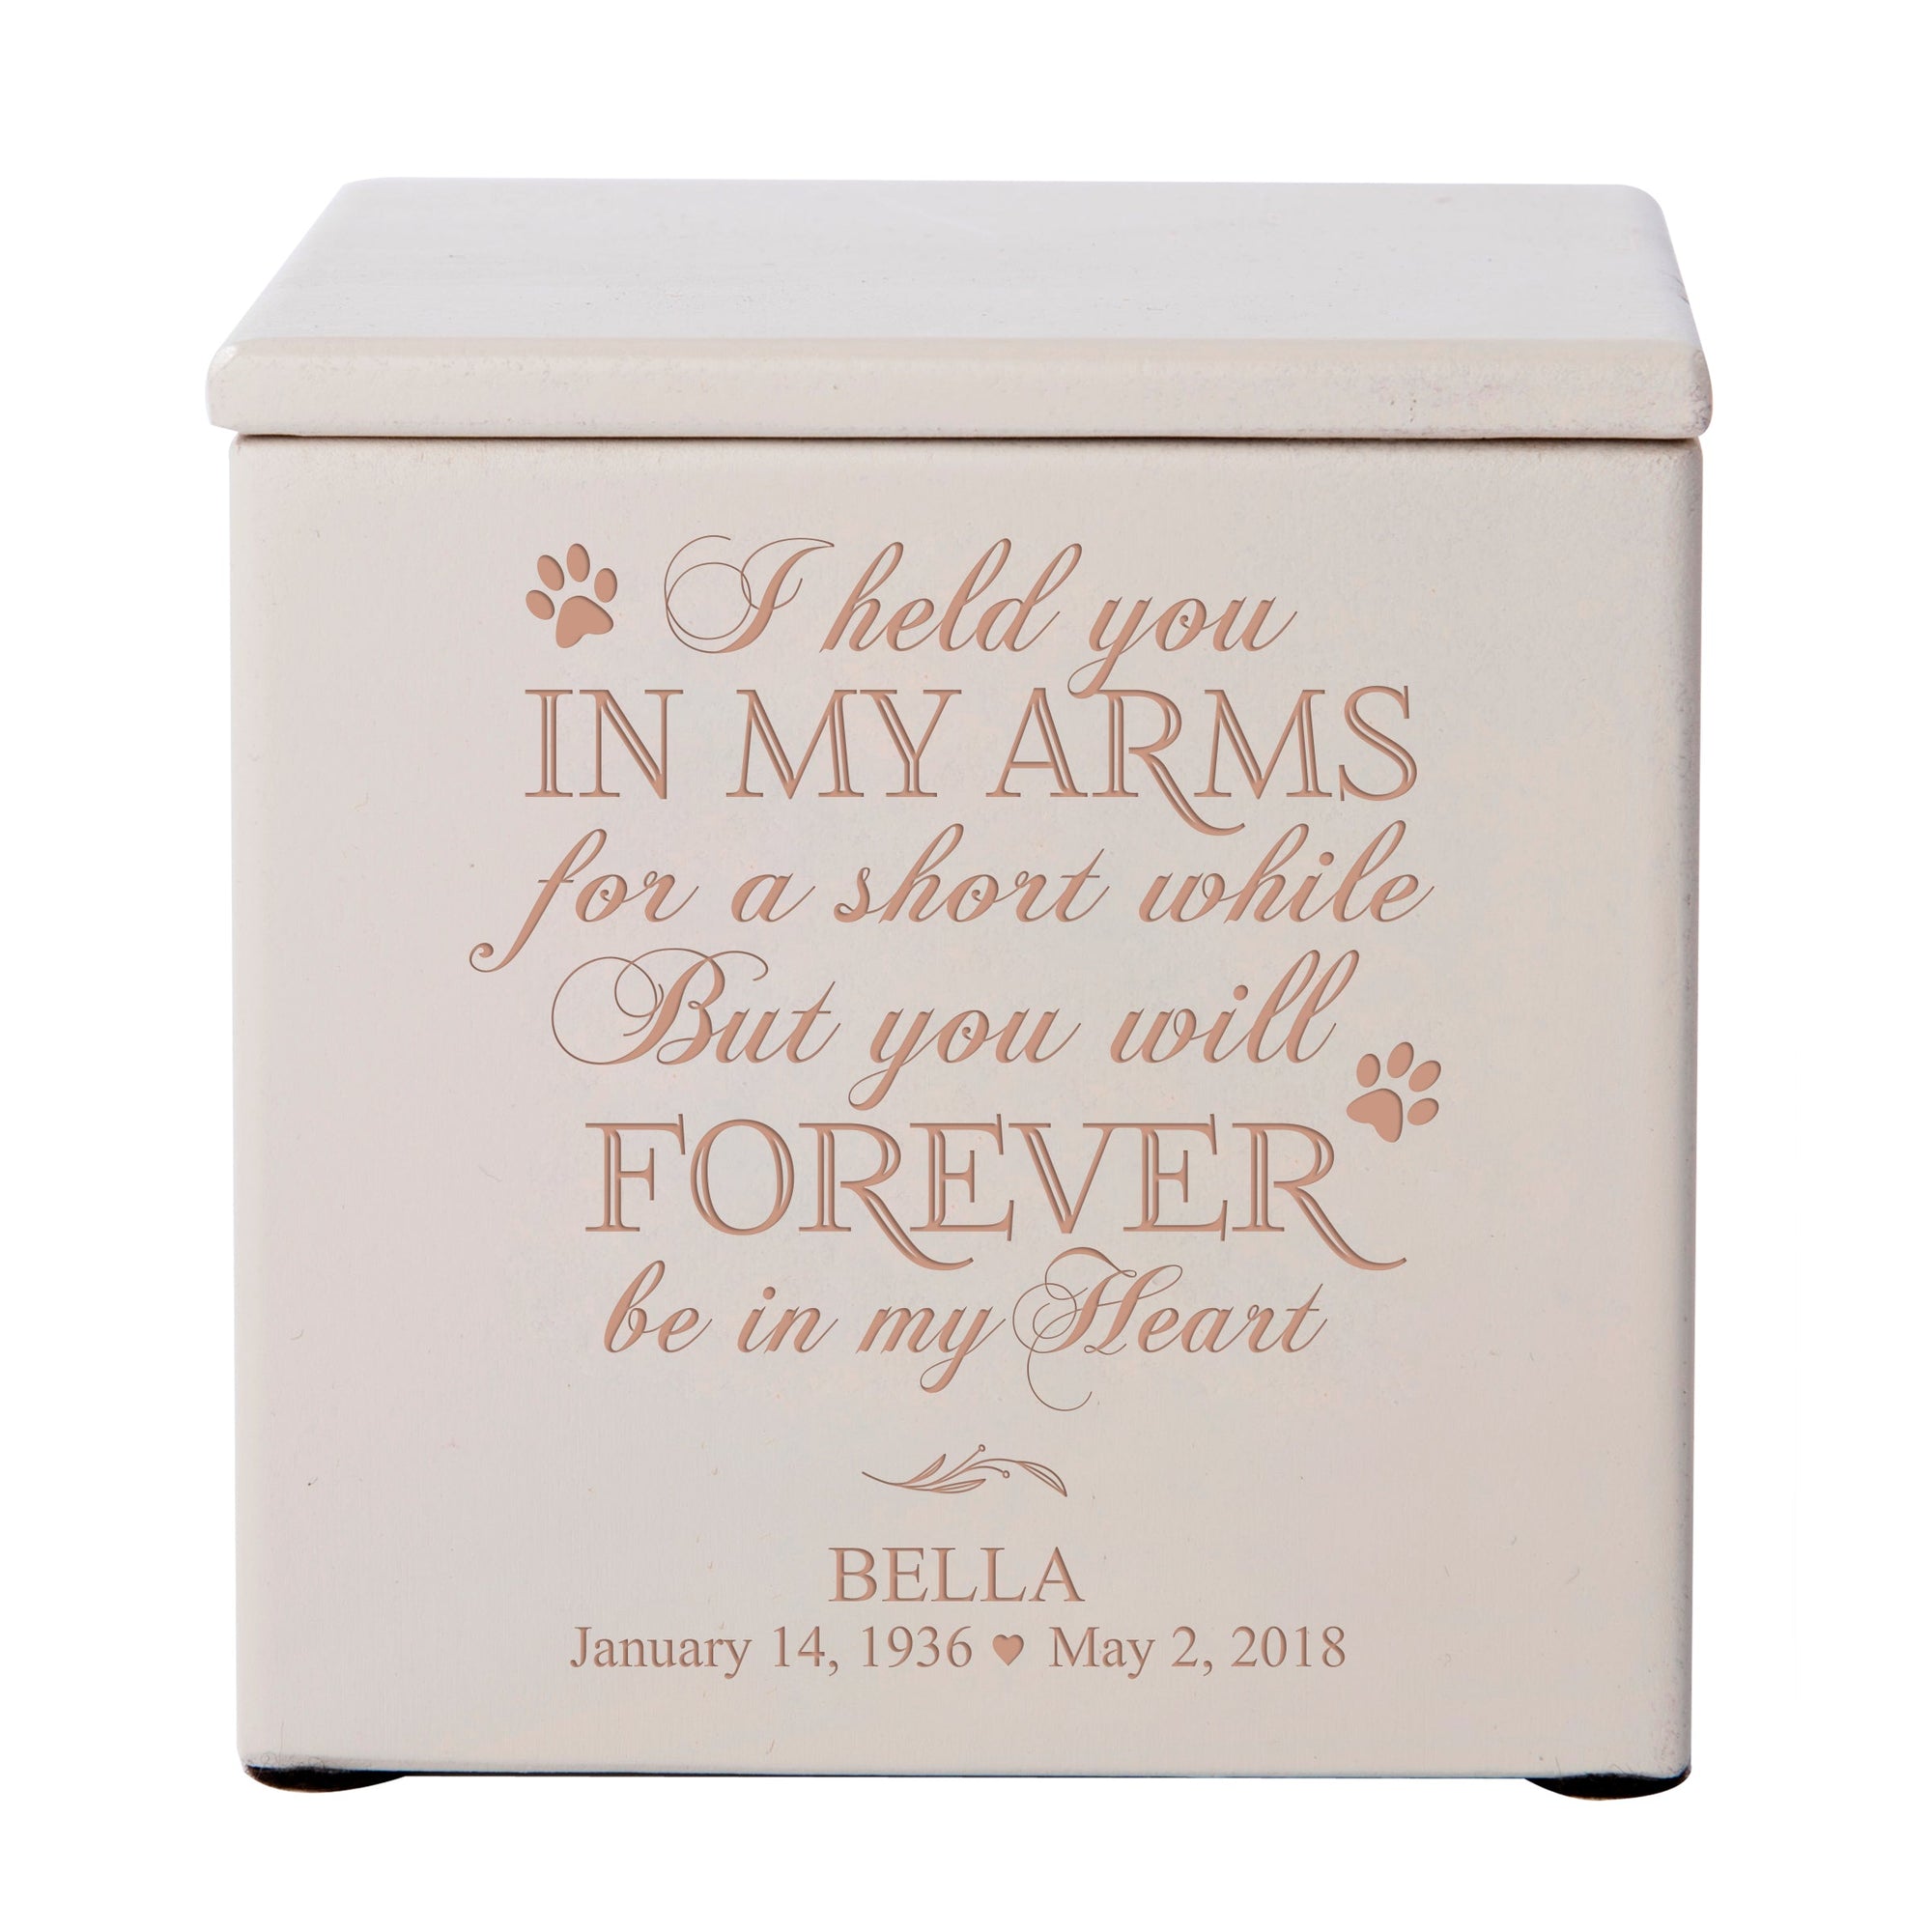 Pet Memorial Keepsake Cremation Urn Box for Dog or Cat - I Held You In My Arms